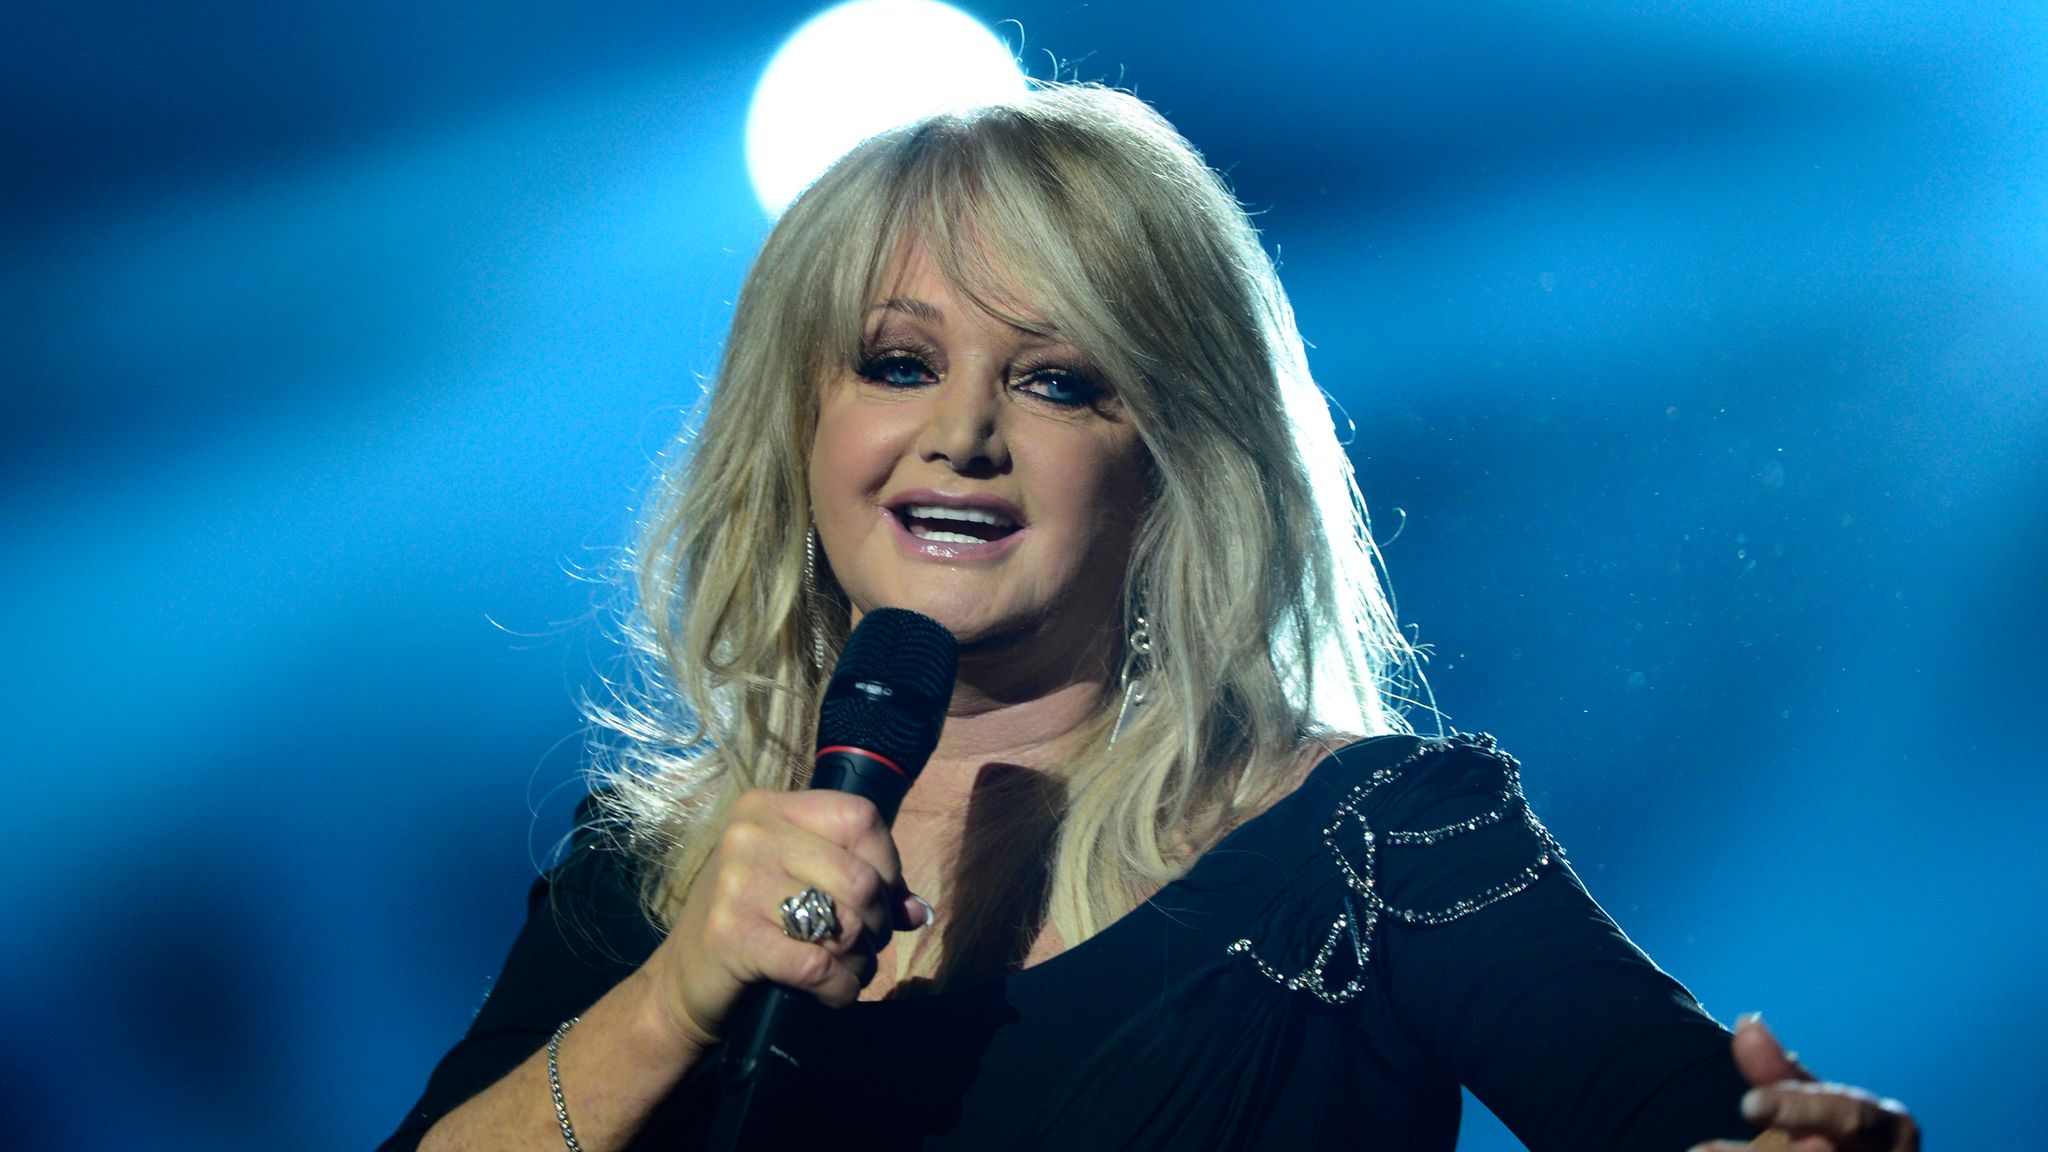 Bonnie Tyler to perform Total Eclipse during actual total eclipse